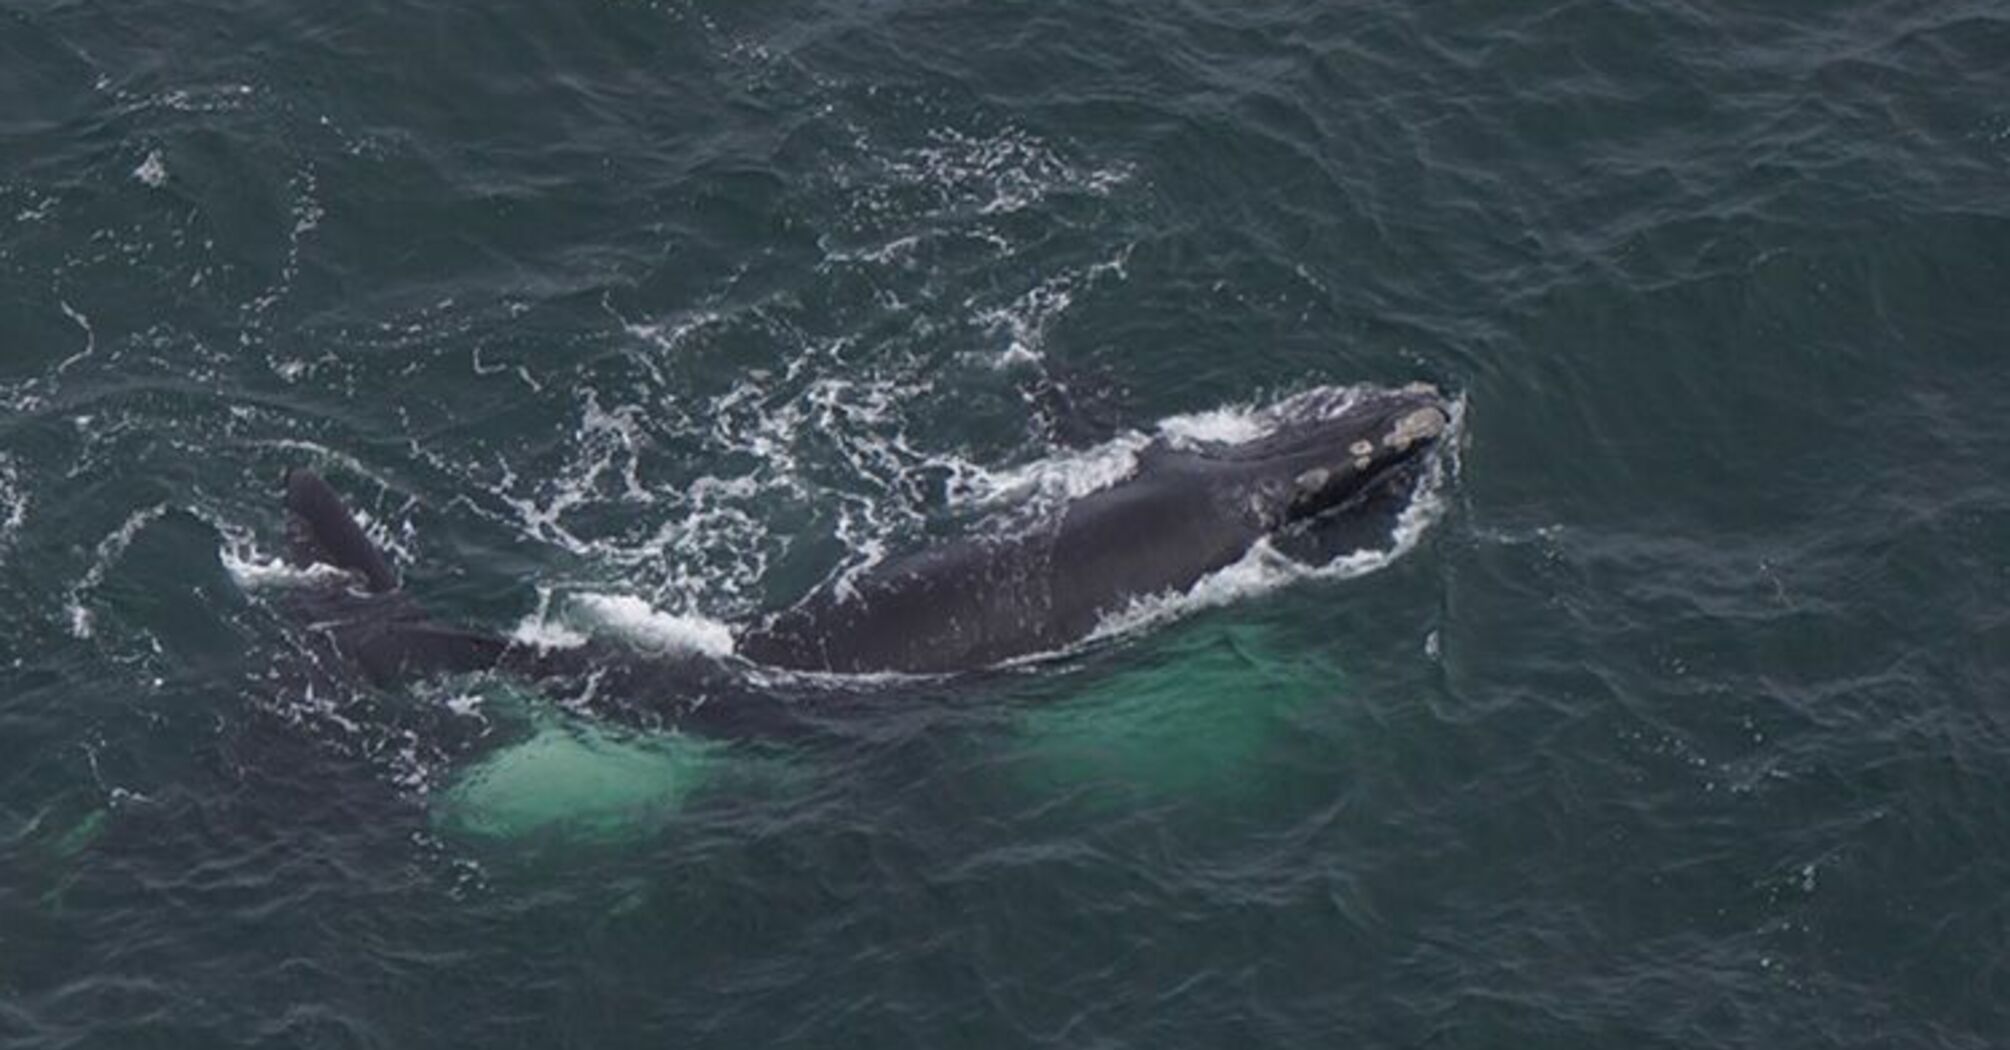 A rare gray whale that has been extinct in the Atlantic for over 200 years has been spotted off the coast of Nantucket